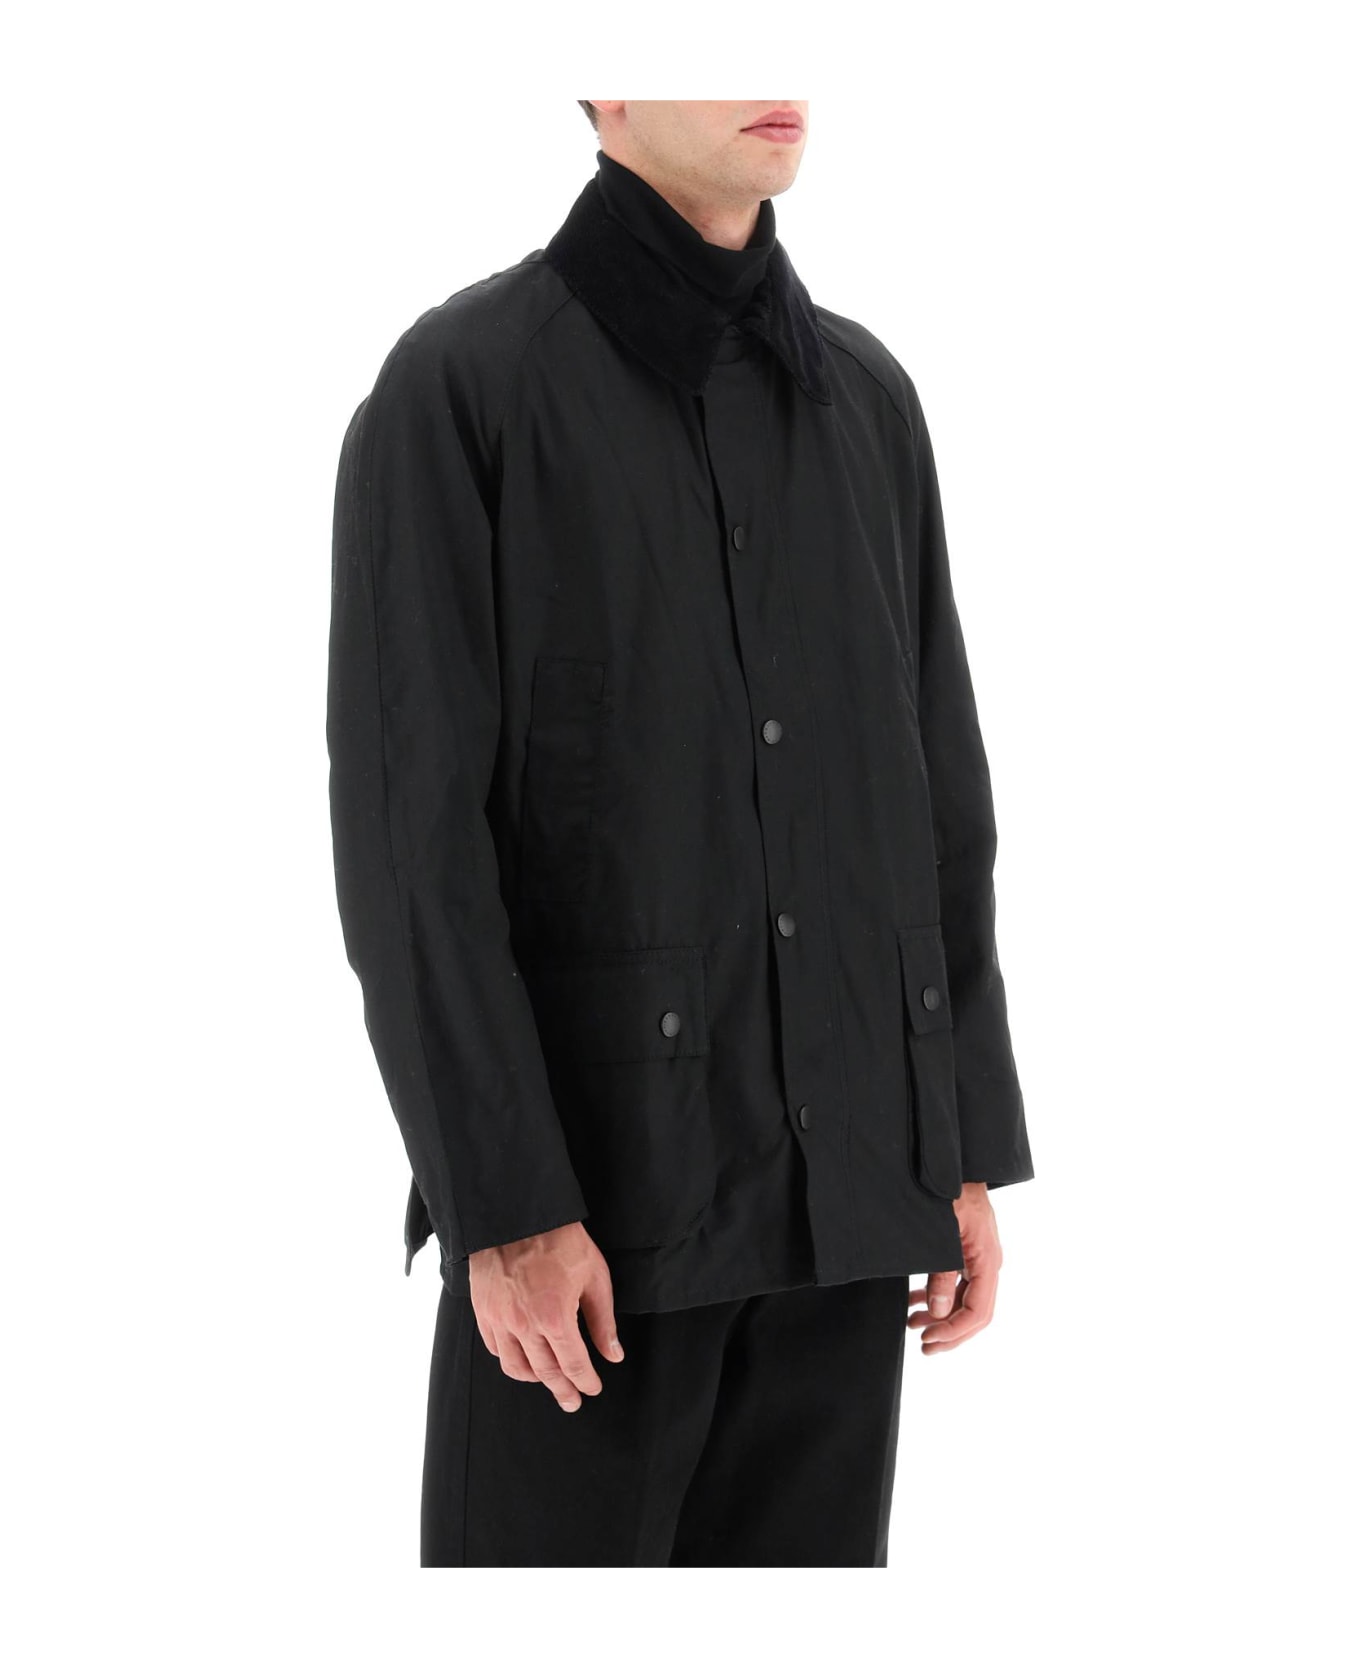 Barbour Ashby Waxed Jacket - BLACK CLASSIC (Black) ジャケット